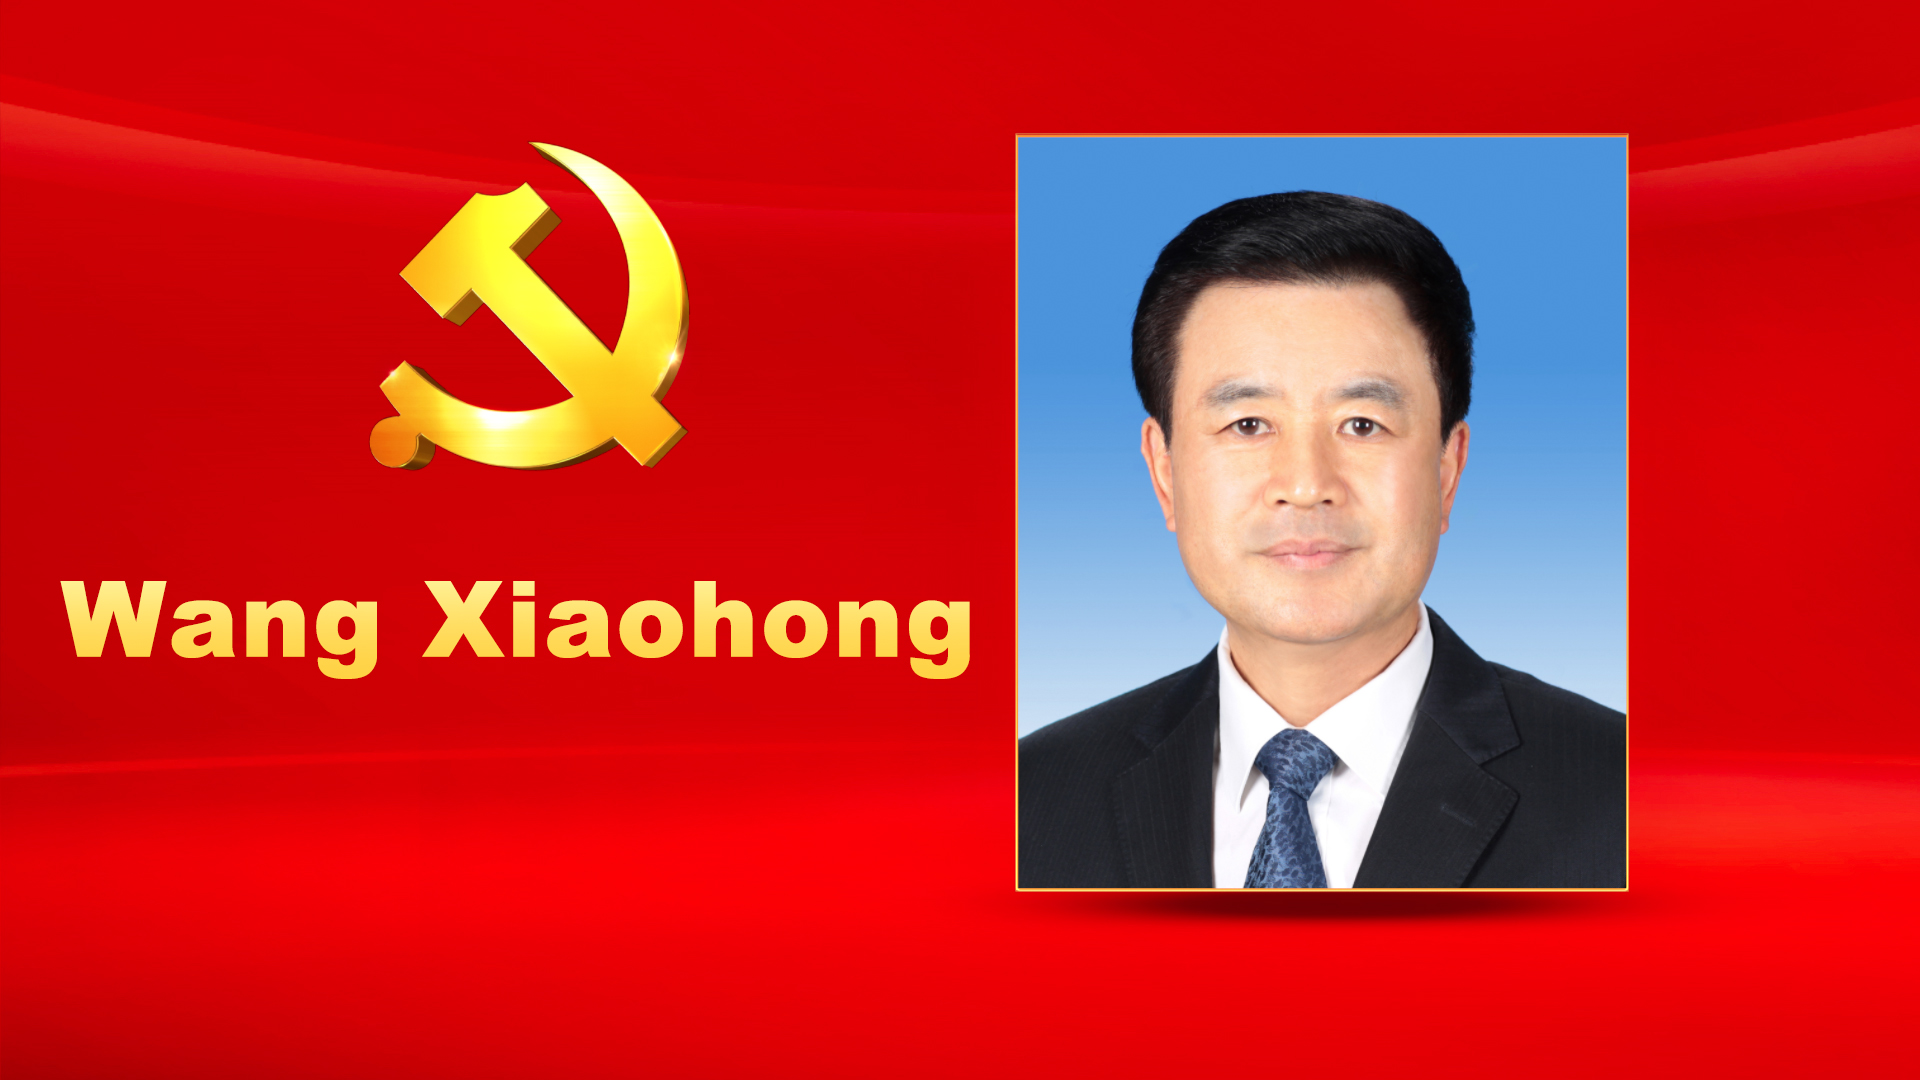 Wang Xiaohong, male, Han ethnicity, was born in July 1957 and is from Fuzhou, Fujian Province. He began his first job in July 1974 and joined the Communist Party of China (CPC) in December 1982. He received an undergraduate education at the Central Party School. Wang is currently a member of the CPC Central Committee Secretariat, Minister and CPC Committee Secretary of the Ministry of Public Security, and Deputy Secretary of the Political and Legal Affairs Committee under the CPC Central Committee. He is a General Police Commissioner.